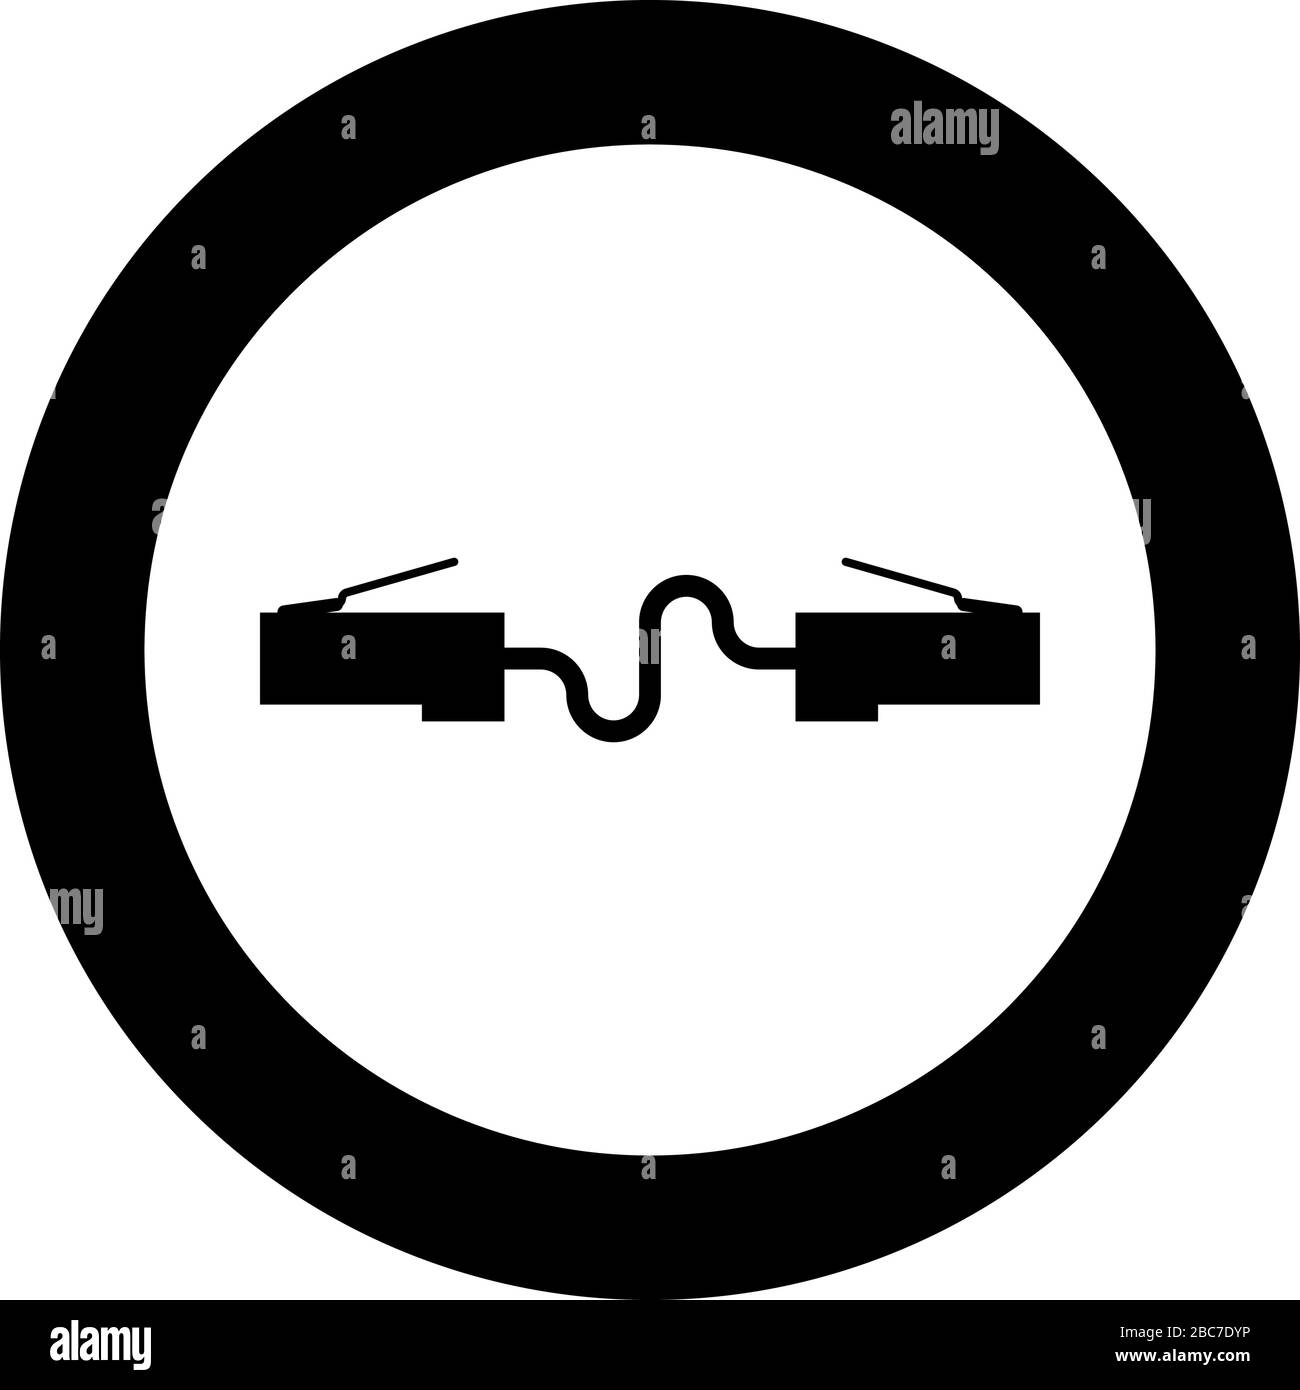 Network connector Patch cord Ethernet cable LAN wire icon in circle round black color vector illustration flat style simple image Stock Vector